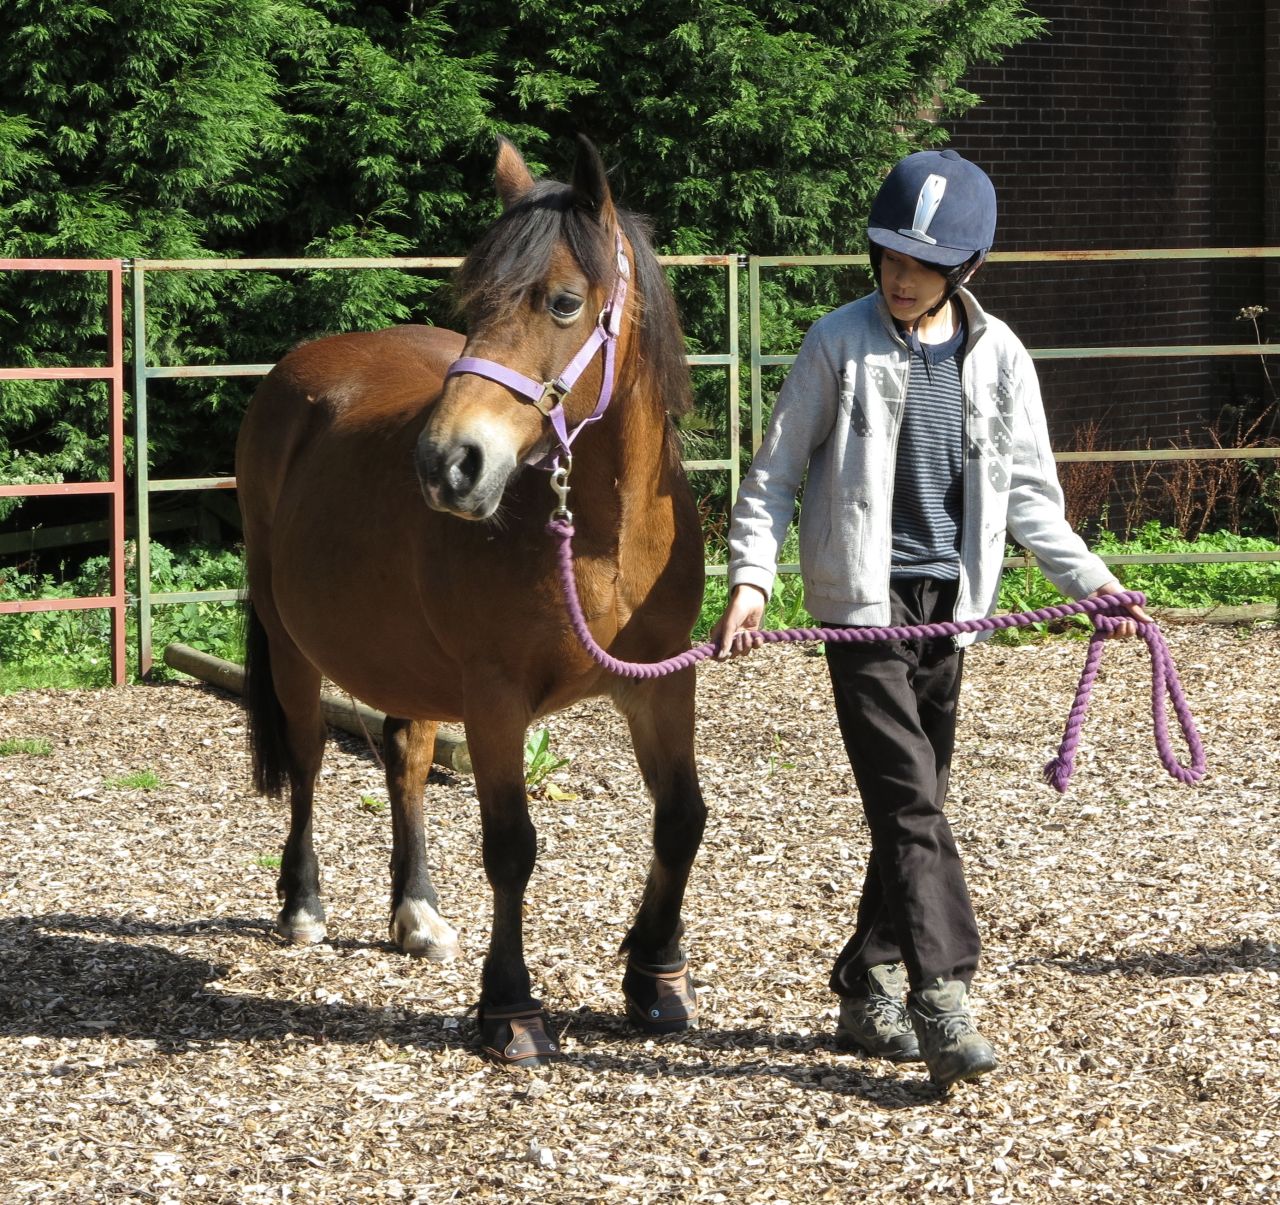 For patients coming from traumatic home lives, the fresh air of the great outdoors and chance to socialize, are just as much a part of the healing process as the horses themselves.